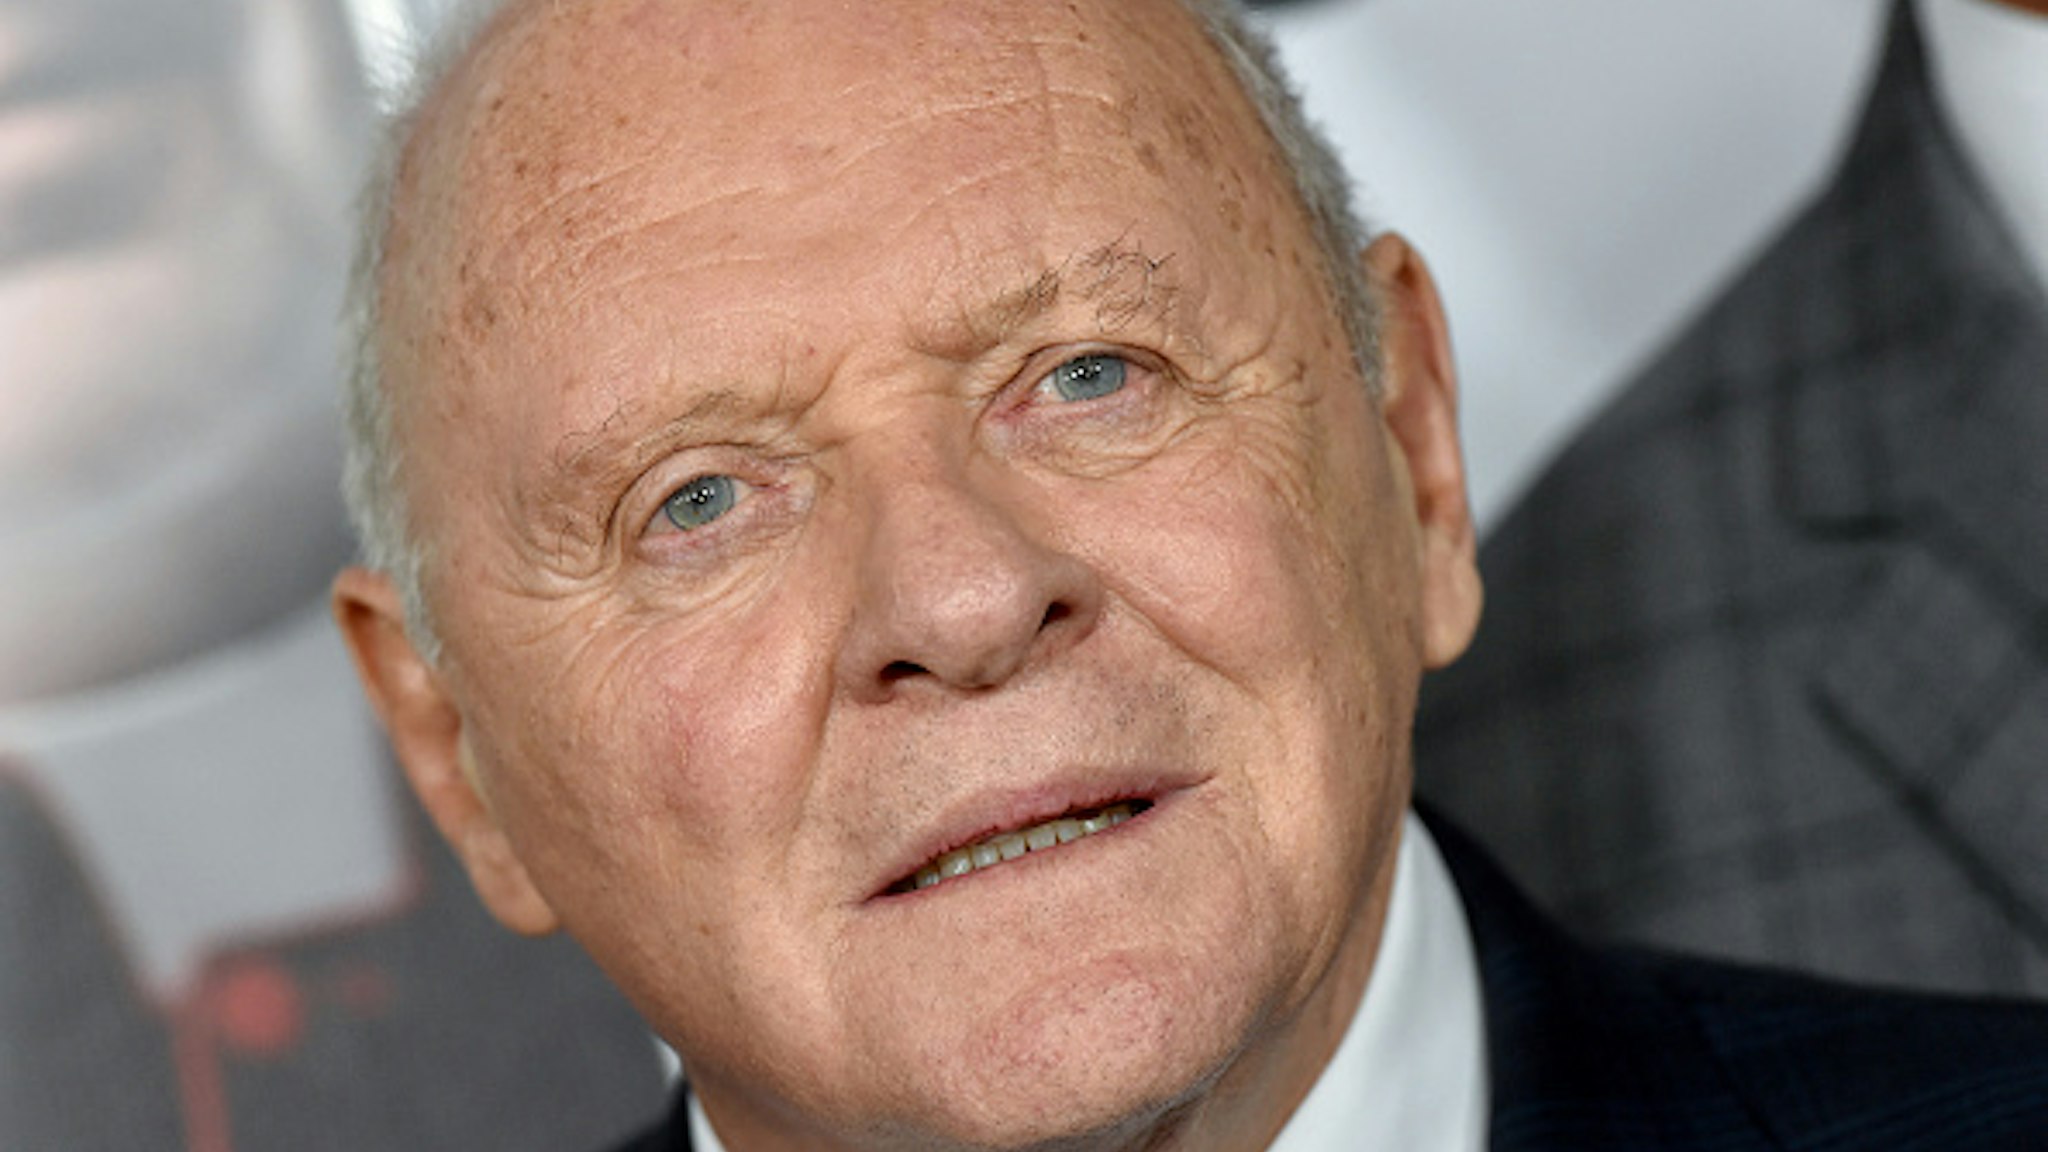 HOLLYWOOD, CALIFORNIA - NOVEMBER 18: Anthony Hopkins attends the "The Two Popes" premiere during AFI FEST 2019 presented by Audi at TCL Chinese Theatre on November 18, 2019 in Hollywood, California. (